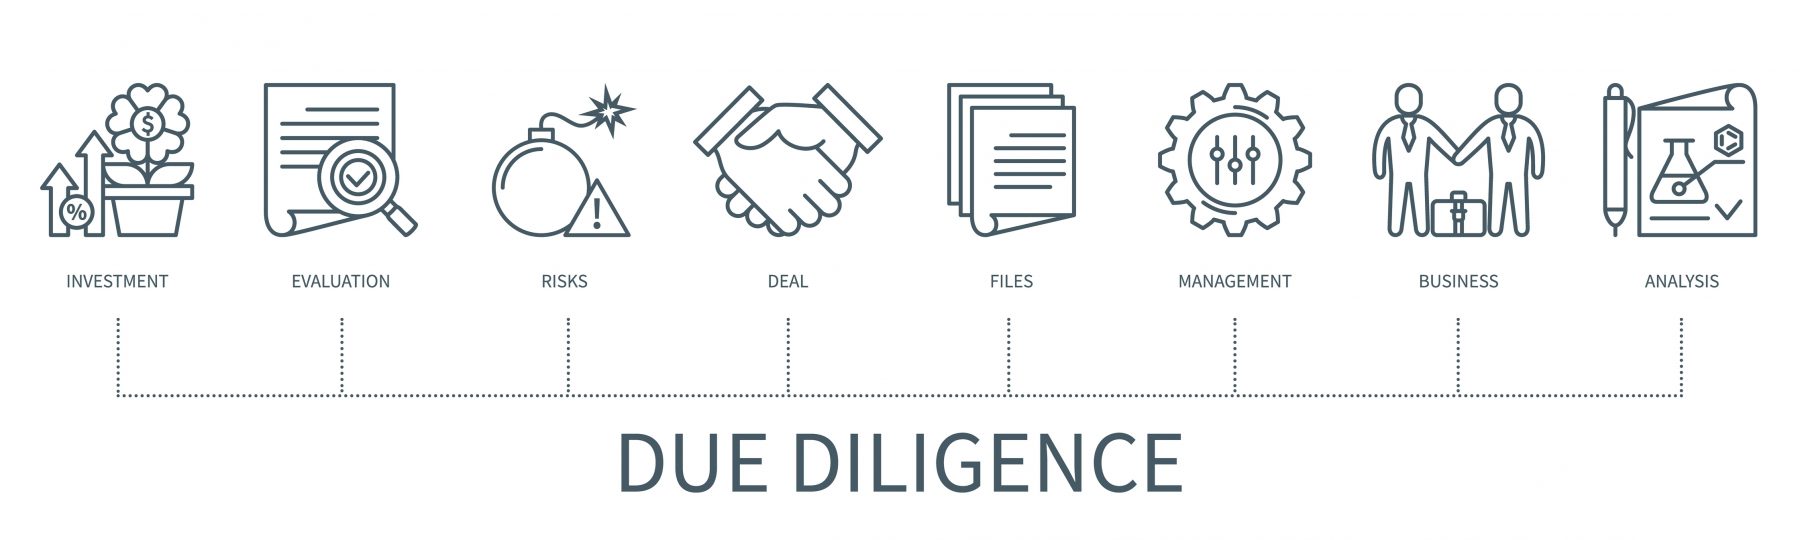 Due diligence can uncover unknown information, so thorough due diligence is important regardless of the transacting parties’ relationship, goodwill, or trust.